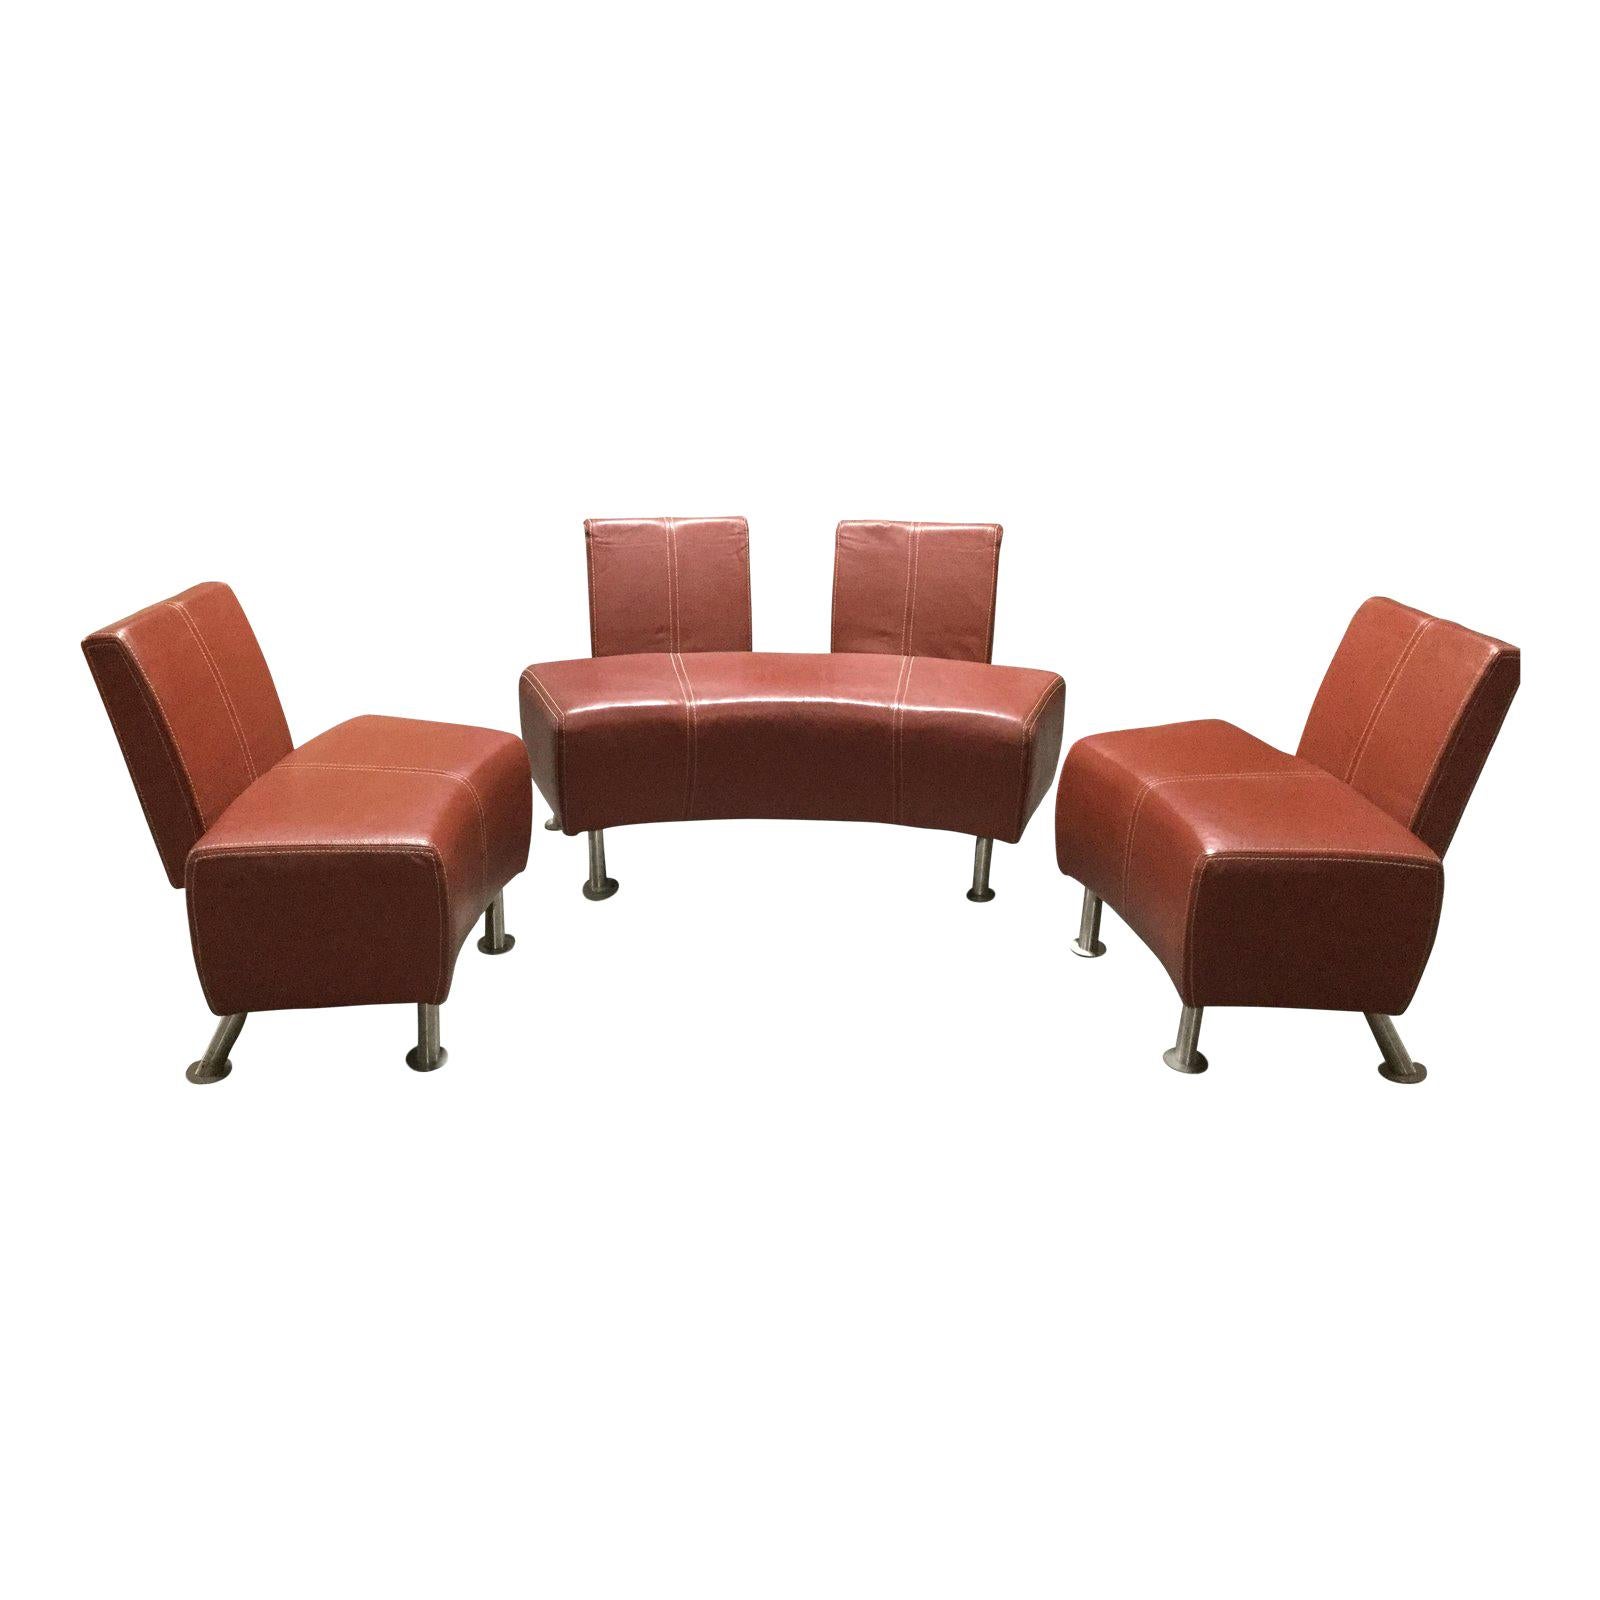 Chic Italian Industrial Leather Salon Set with Two Chairs and Loveseat